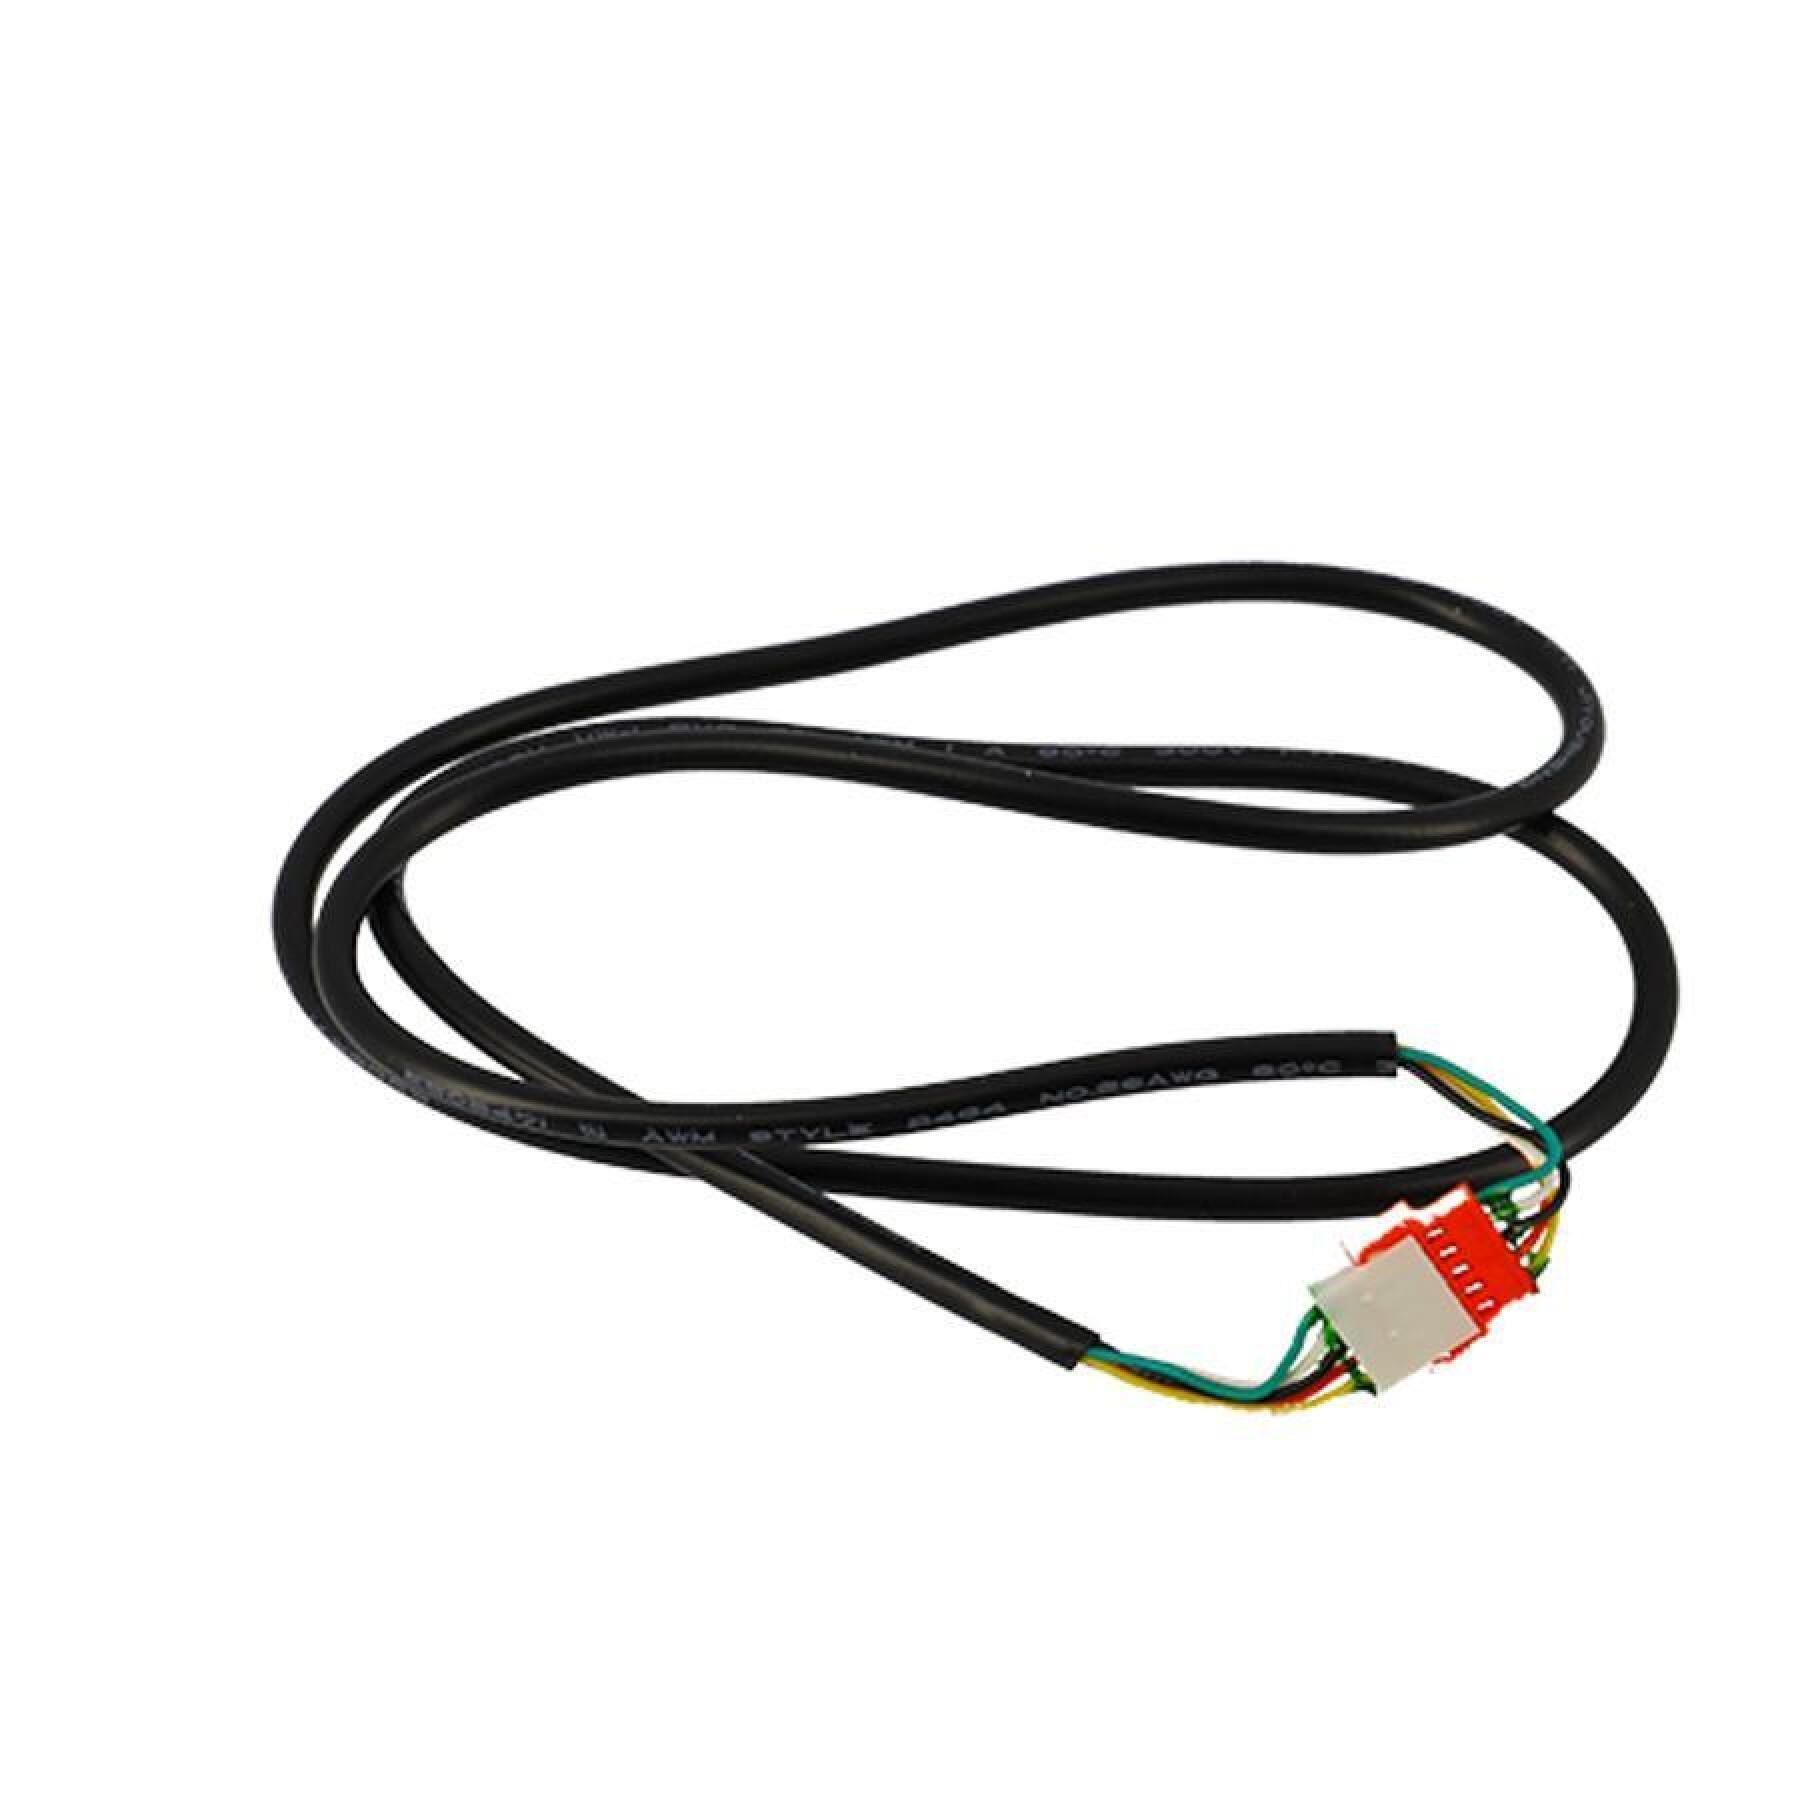 Transmission cable for scooter Wheelyoo